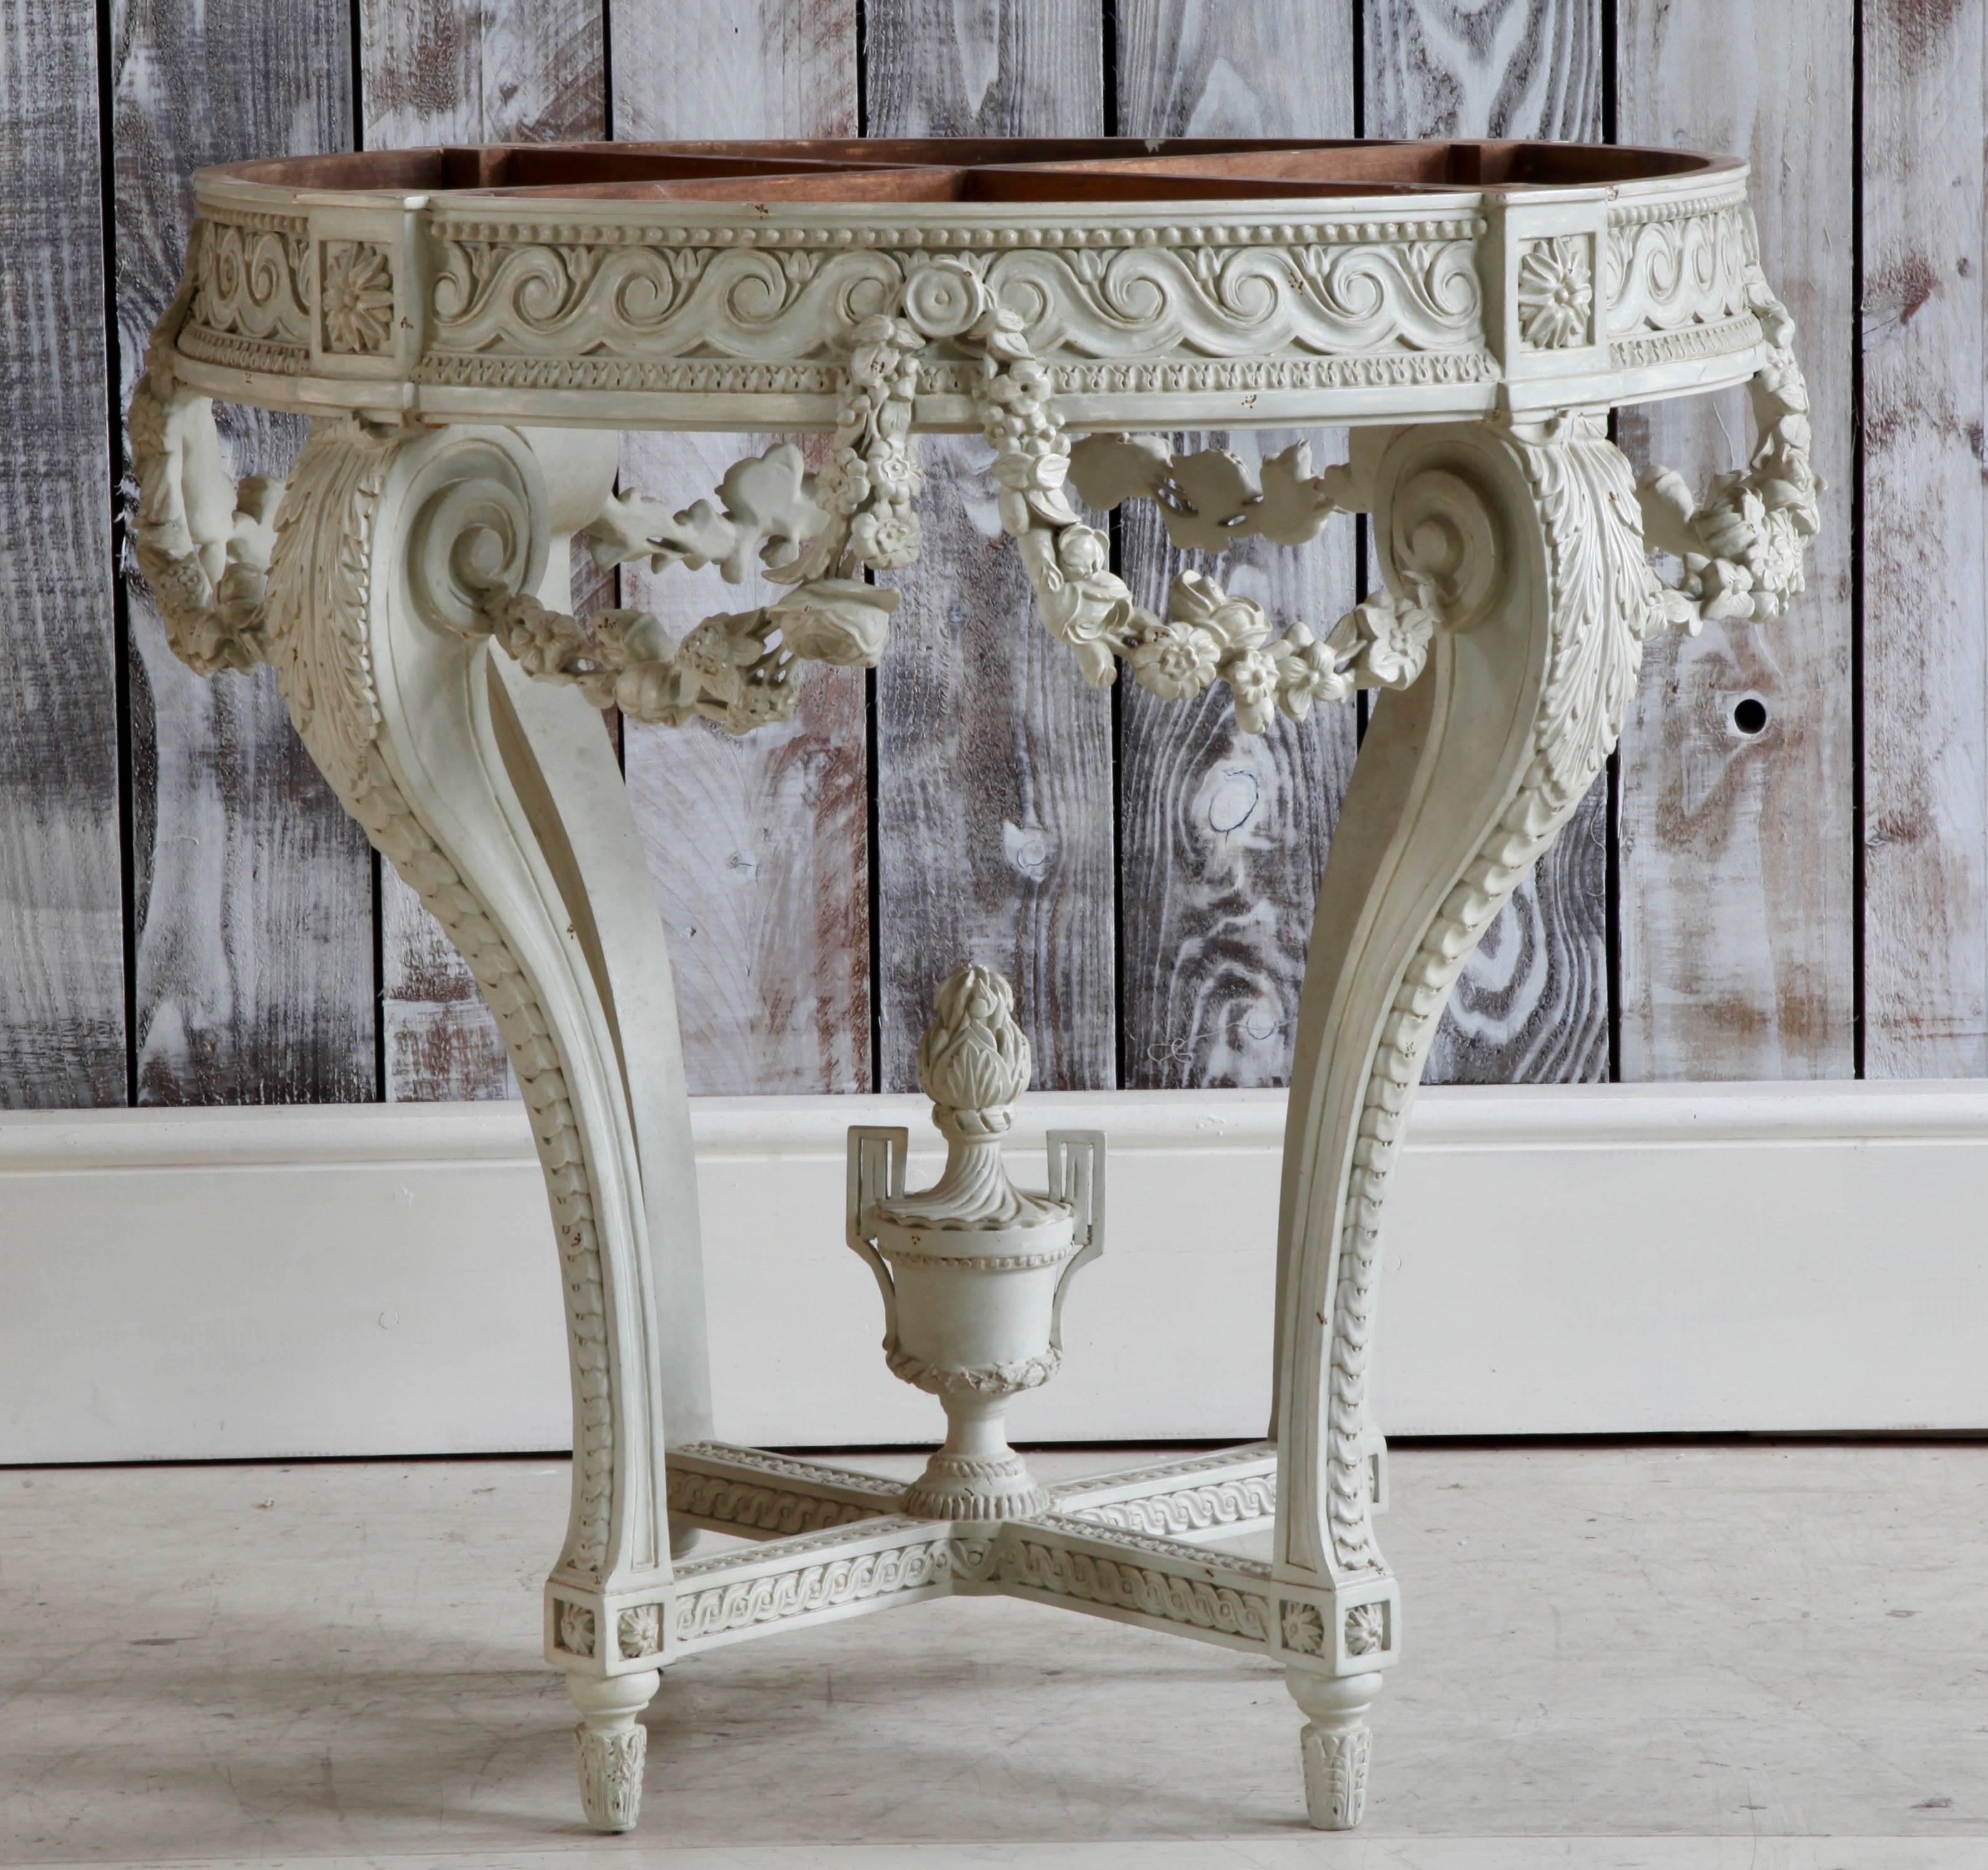 Round console table hand-carved in solid wood in the Louis XVI style featuring neoclassical decorative borders and finely carved floral swags draped in swathes around the tabletop with acanthus leaves at the top of scrolled legs and an urn at the